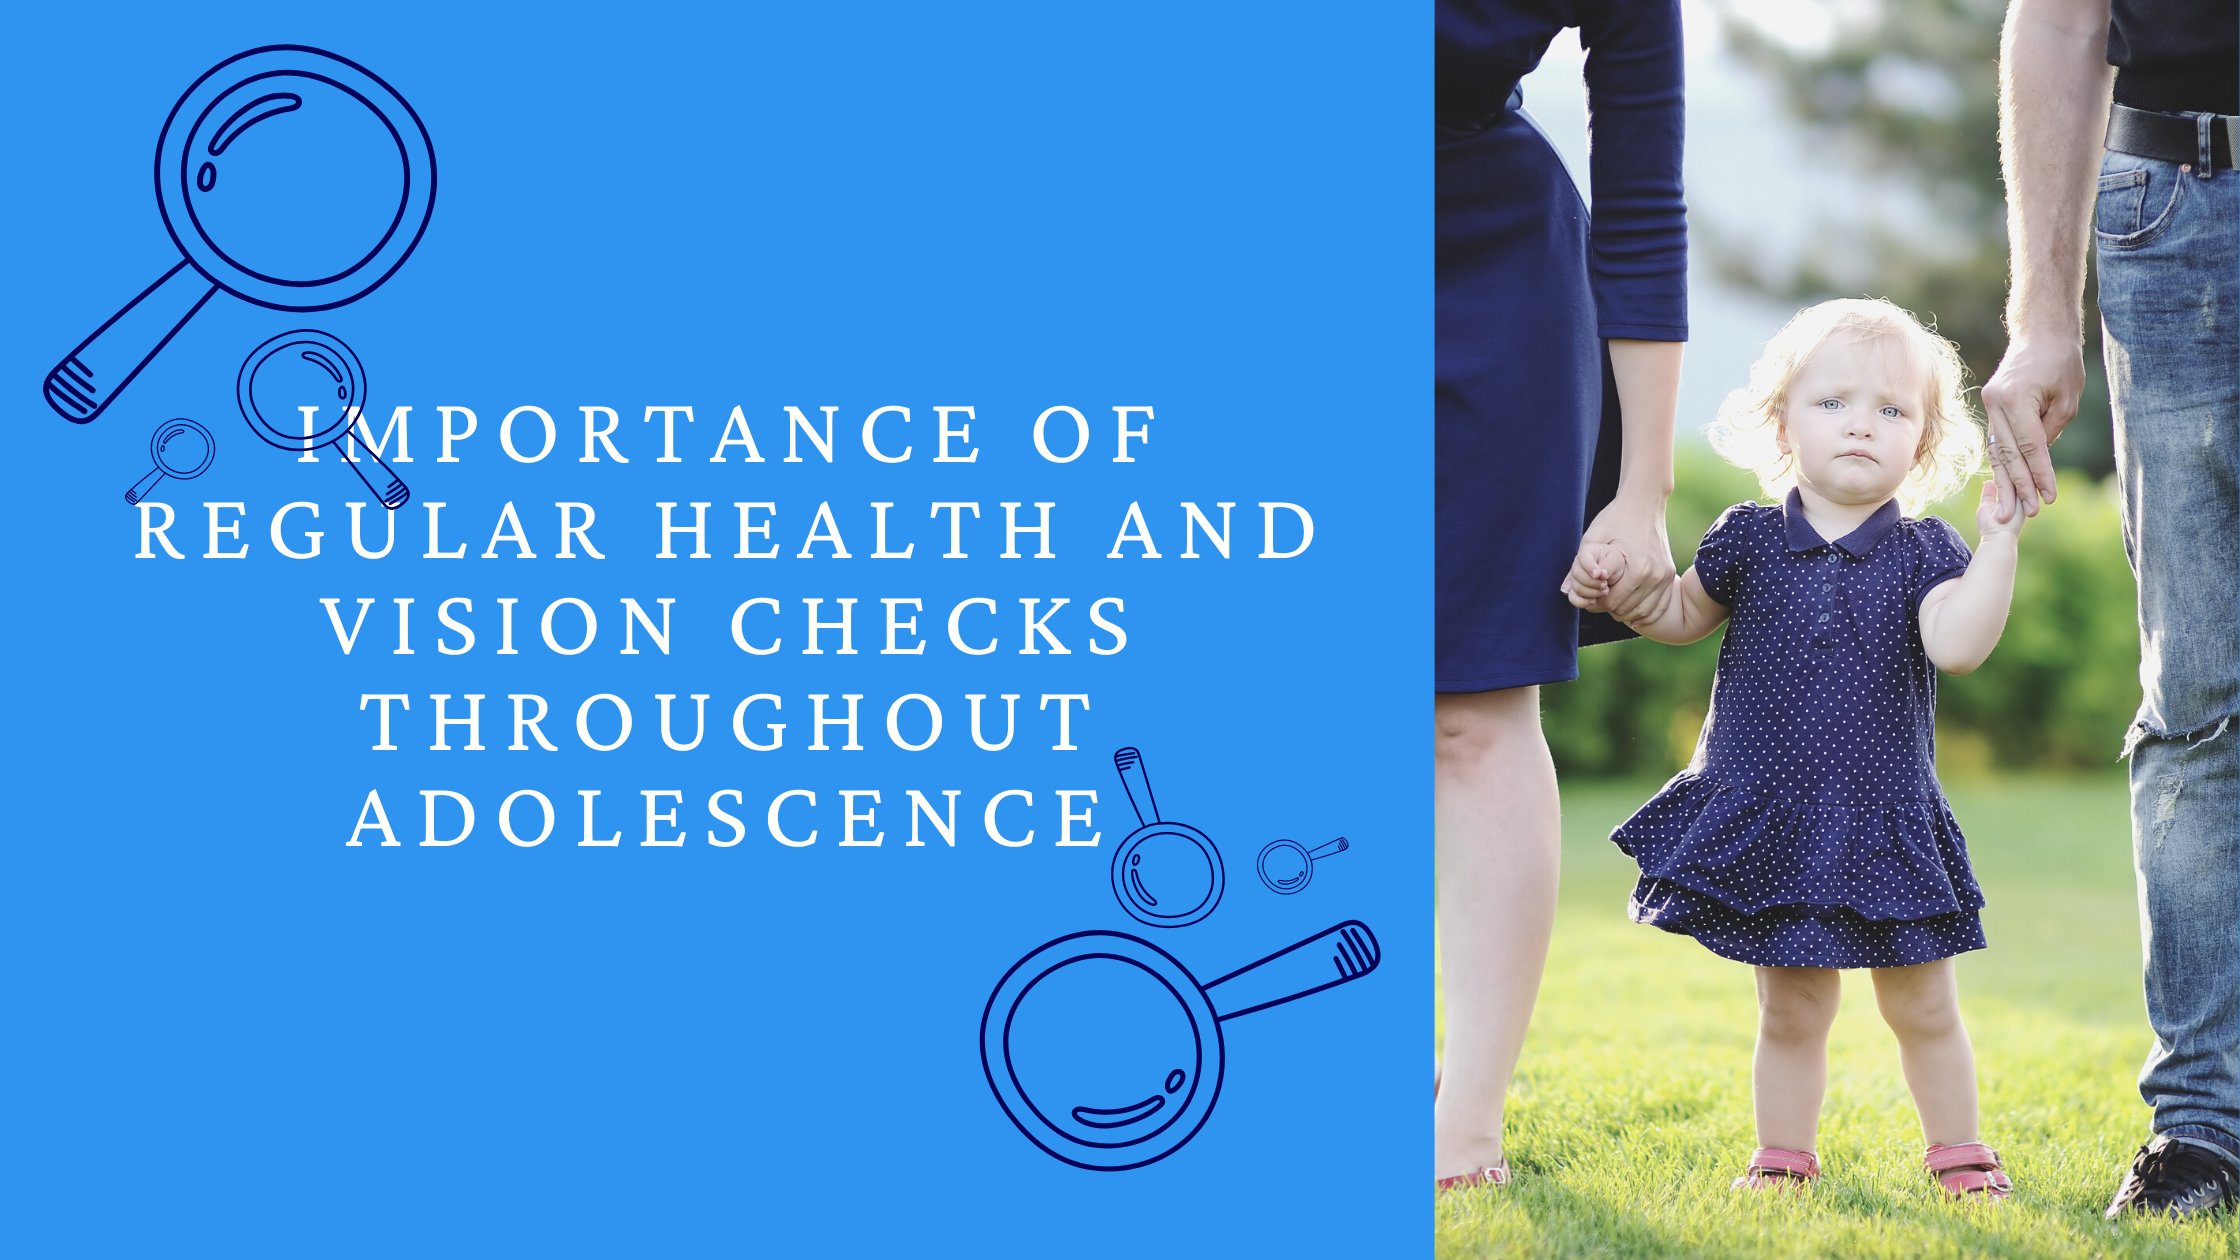 Importance of Regular Health and Vision Checks Throughout Adolescence